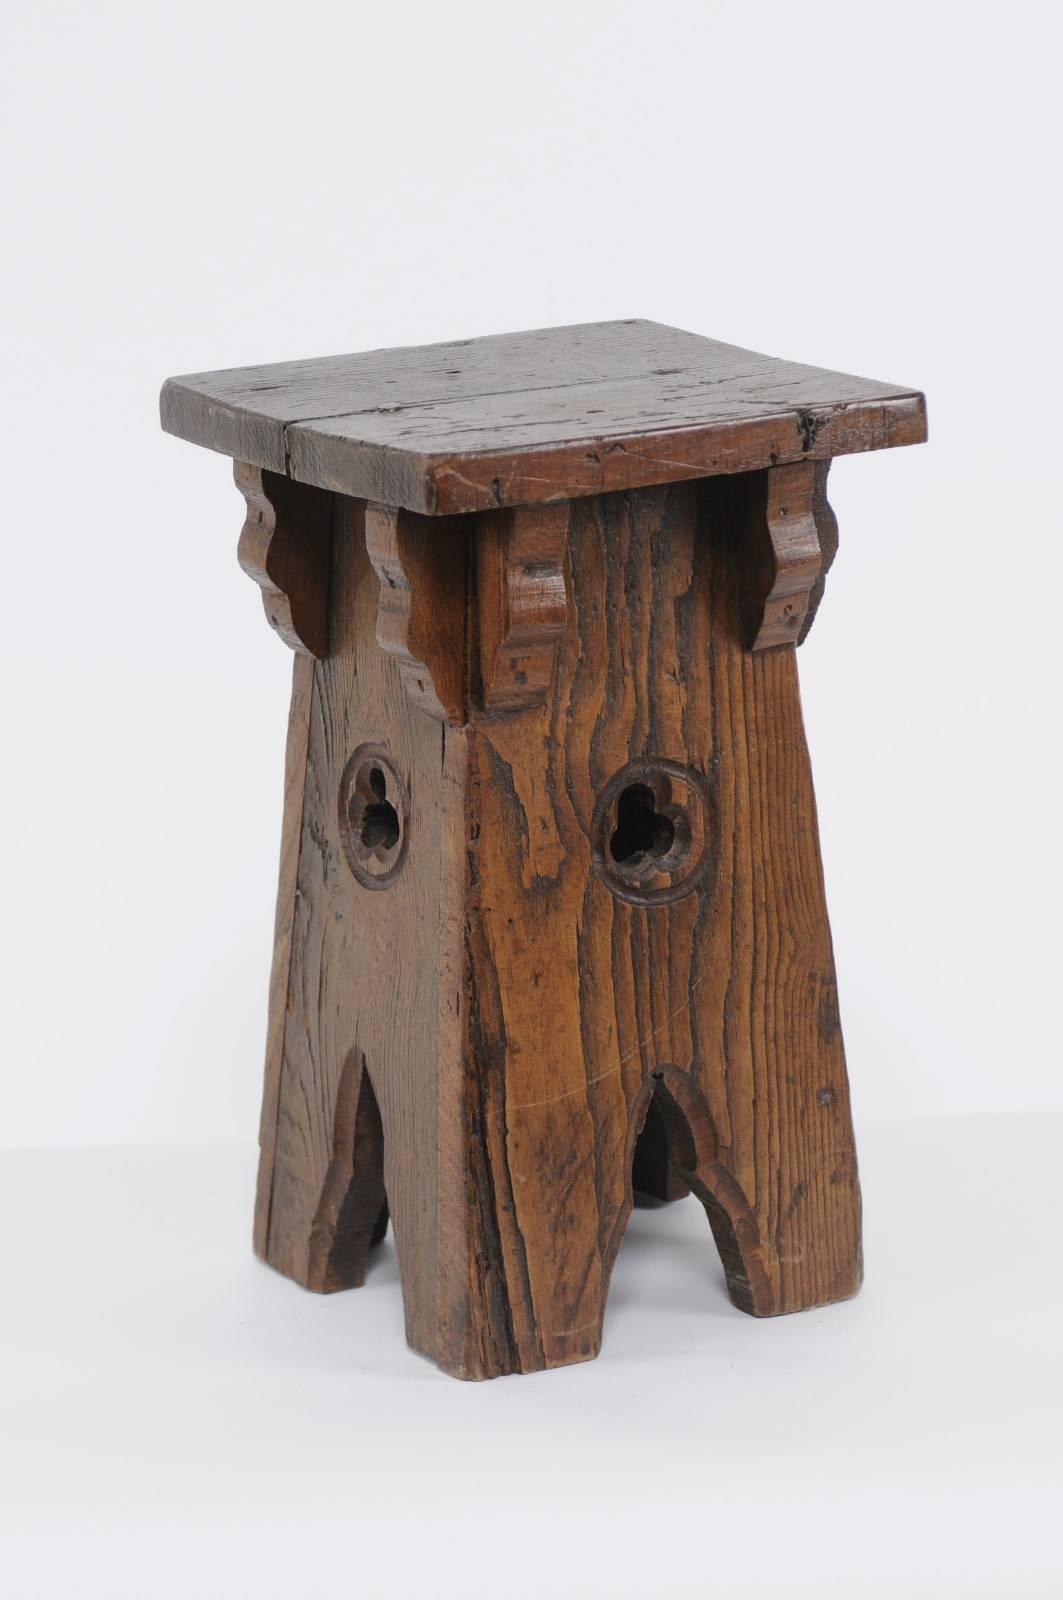 A rustic Spanish oak square-shaped stool with trefoil motifs from the early 20th century. Born in the early 1900s in Spain, this small wooden stool features a square planked top supported by elegant brackets and sitting above a solid base adorned